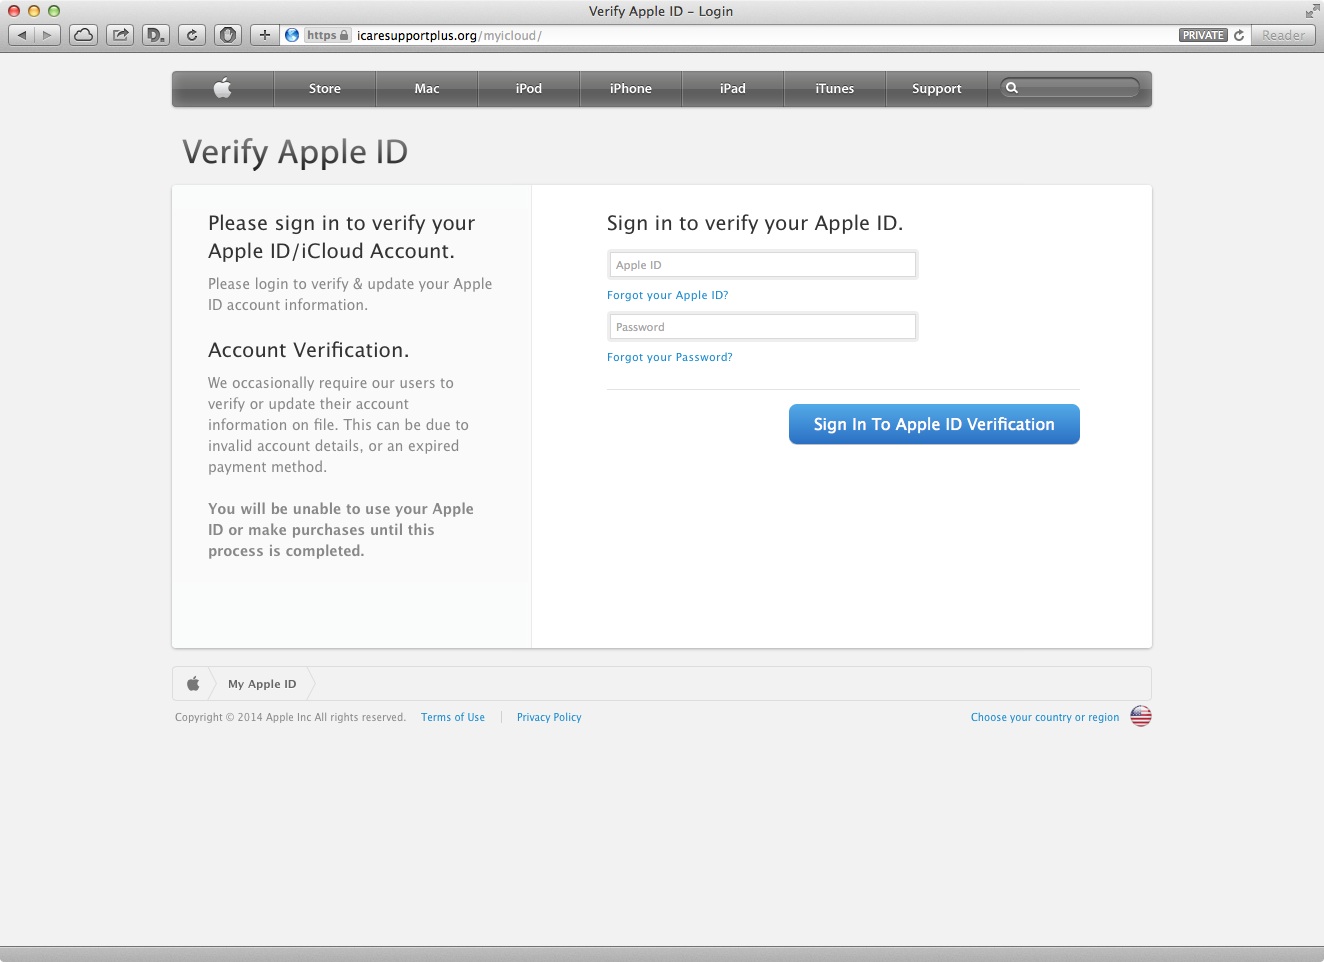 After stealing iCloud user’s password, this rabbit hole goes deeper. 